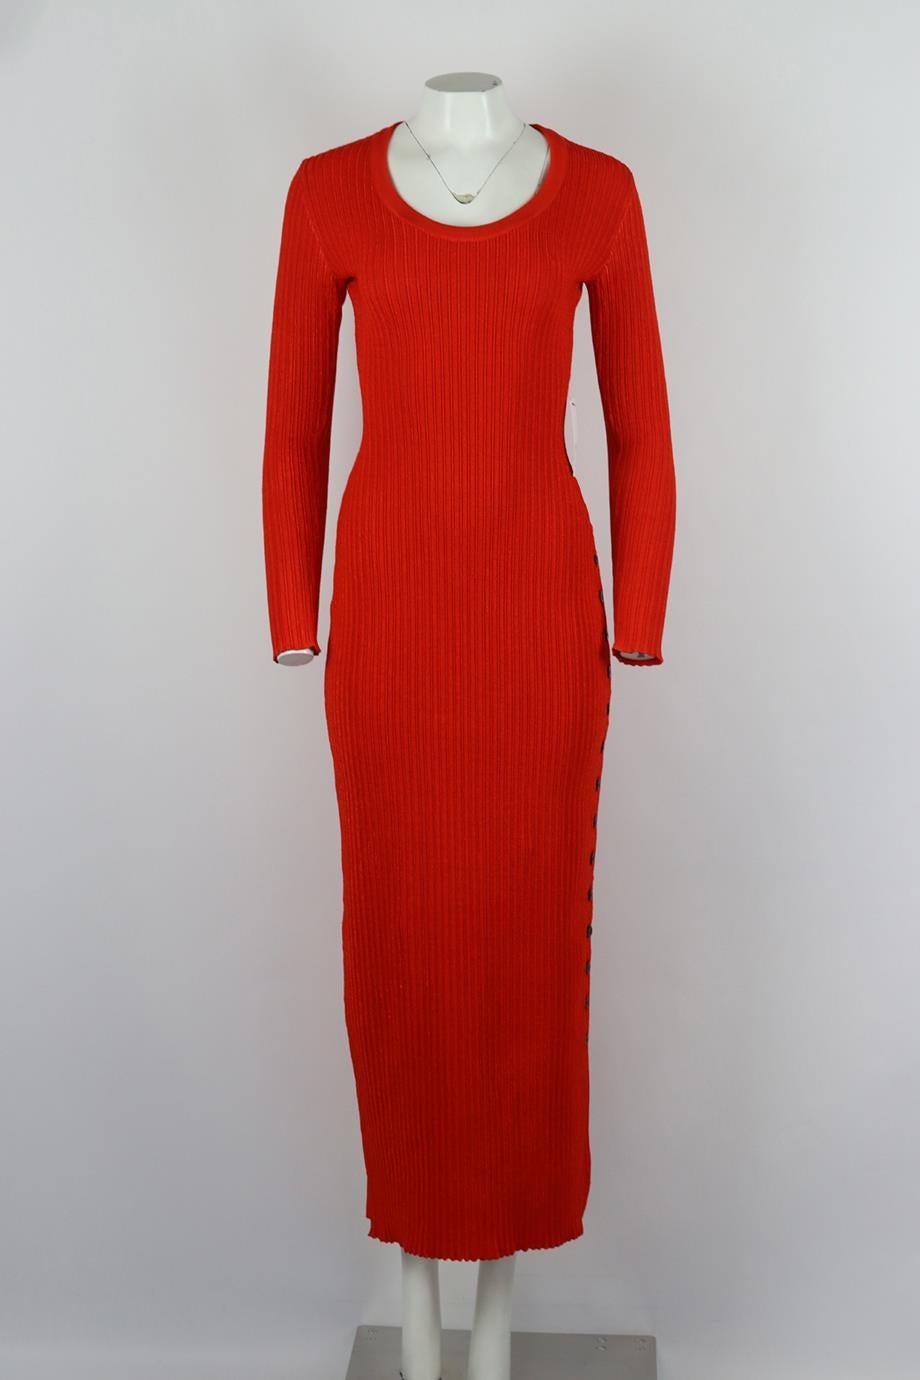 Azzedine Alaïa ribbed stretch knit maxi dress. Red. Long sleeve, scoop neck. Slips on. 91% Viscose, 7% polyamide, 2% elastane. Size: FR 36 (UK 8, US 4, IT 40) Bust: 29.3 in, Waist: 23.7 in, Hips: 30.3 in, Length: 54.4 in. New with tags
